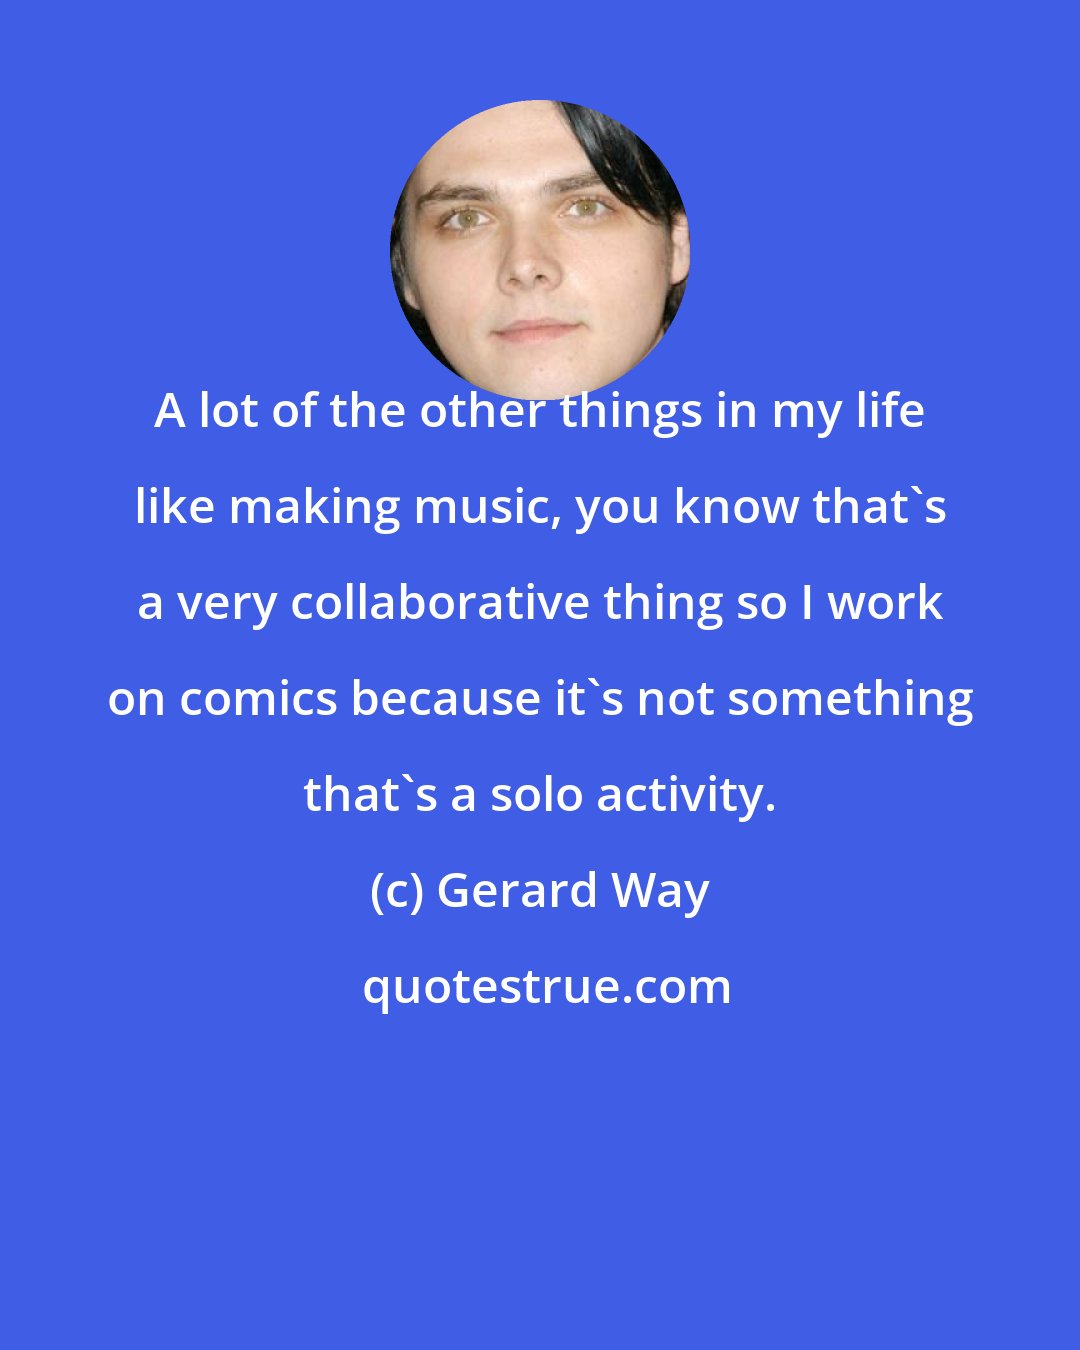 Gerard Way: A lot of the other things in my life like making music, you know that's a very collaborative thing so I work on comics because it's not something that's a solo activity.